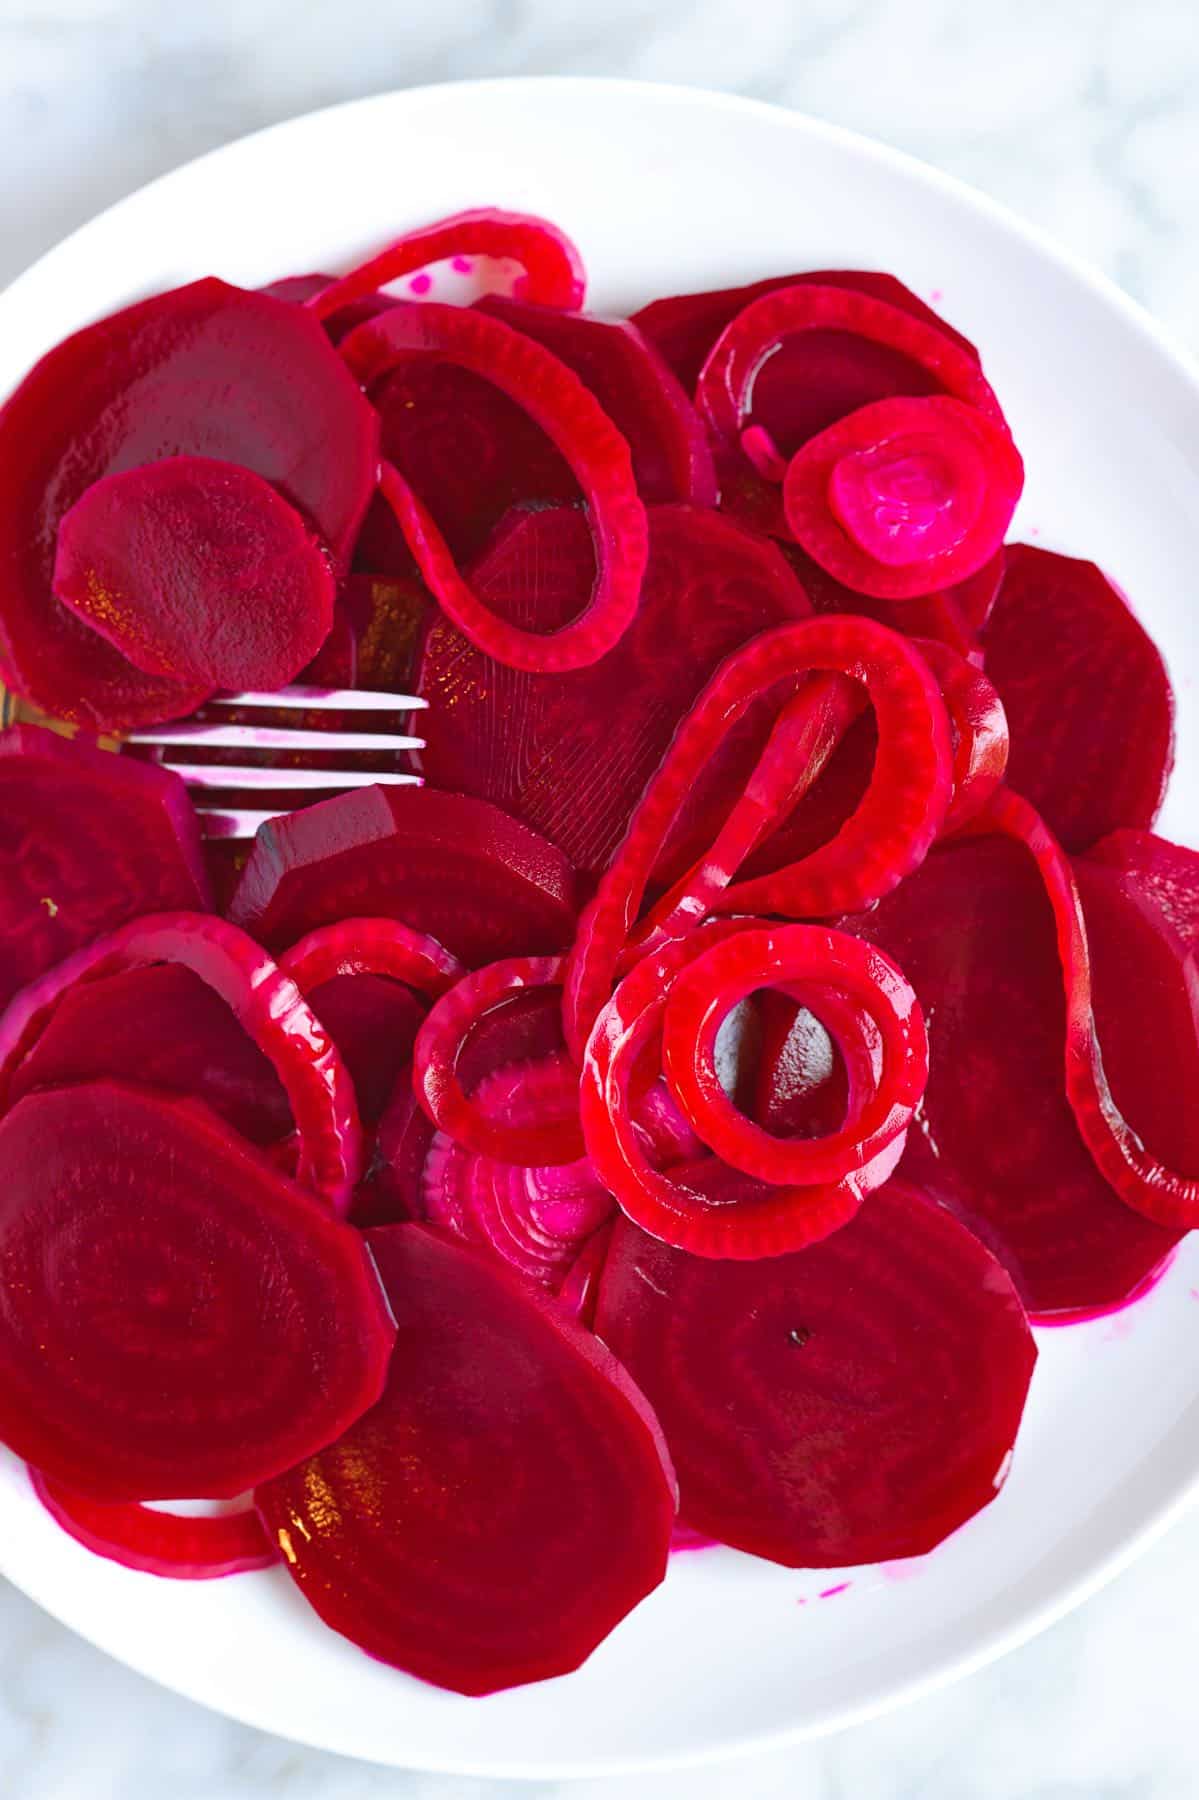 Pickled beets with onions